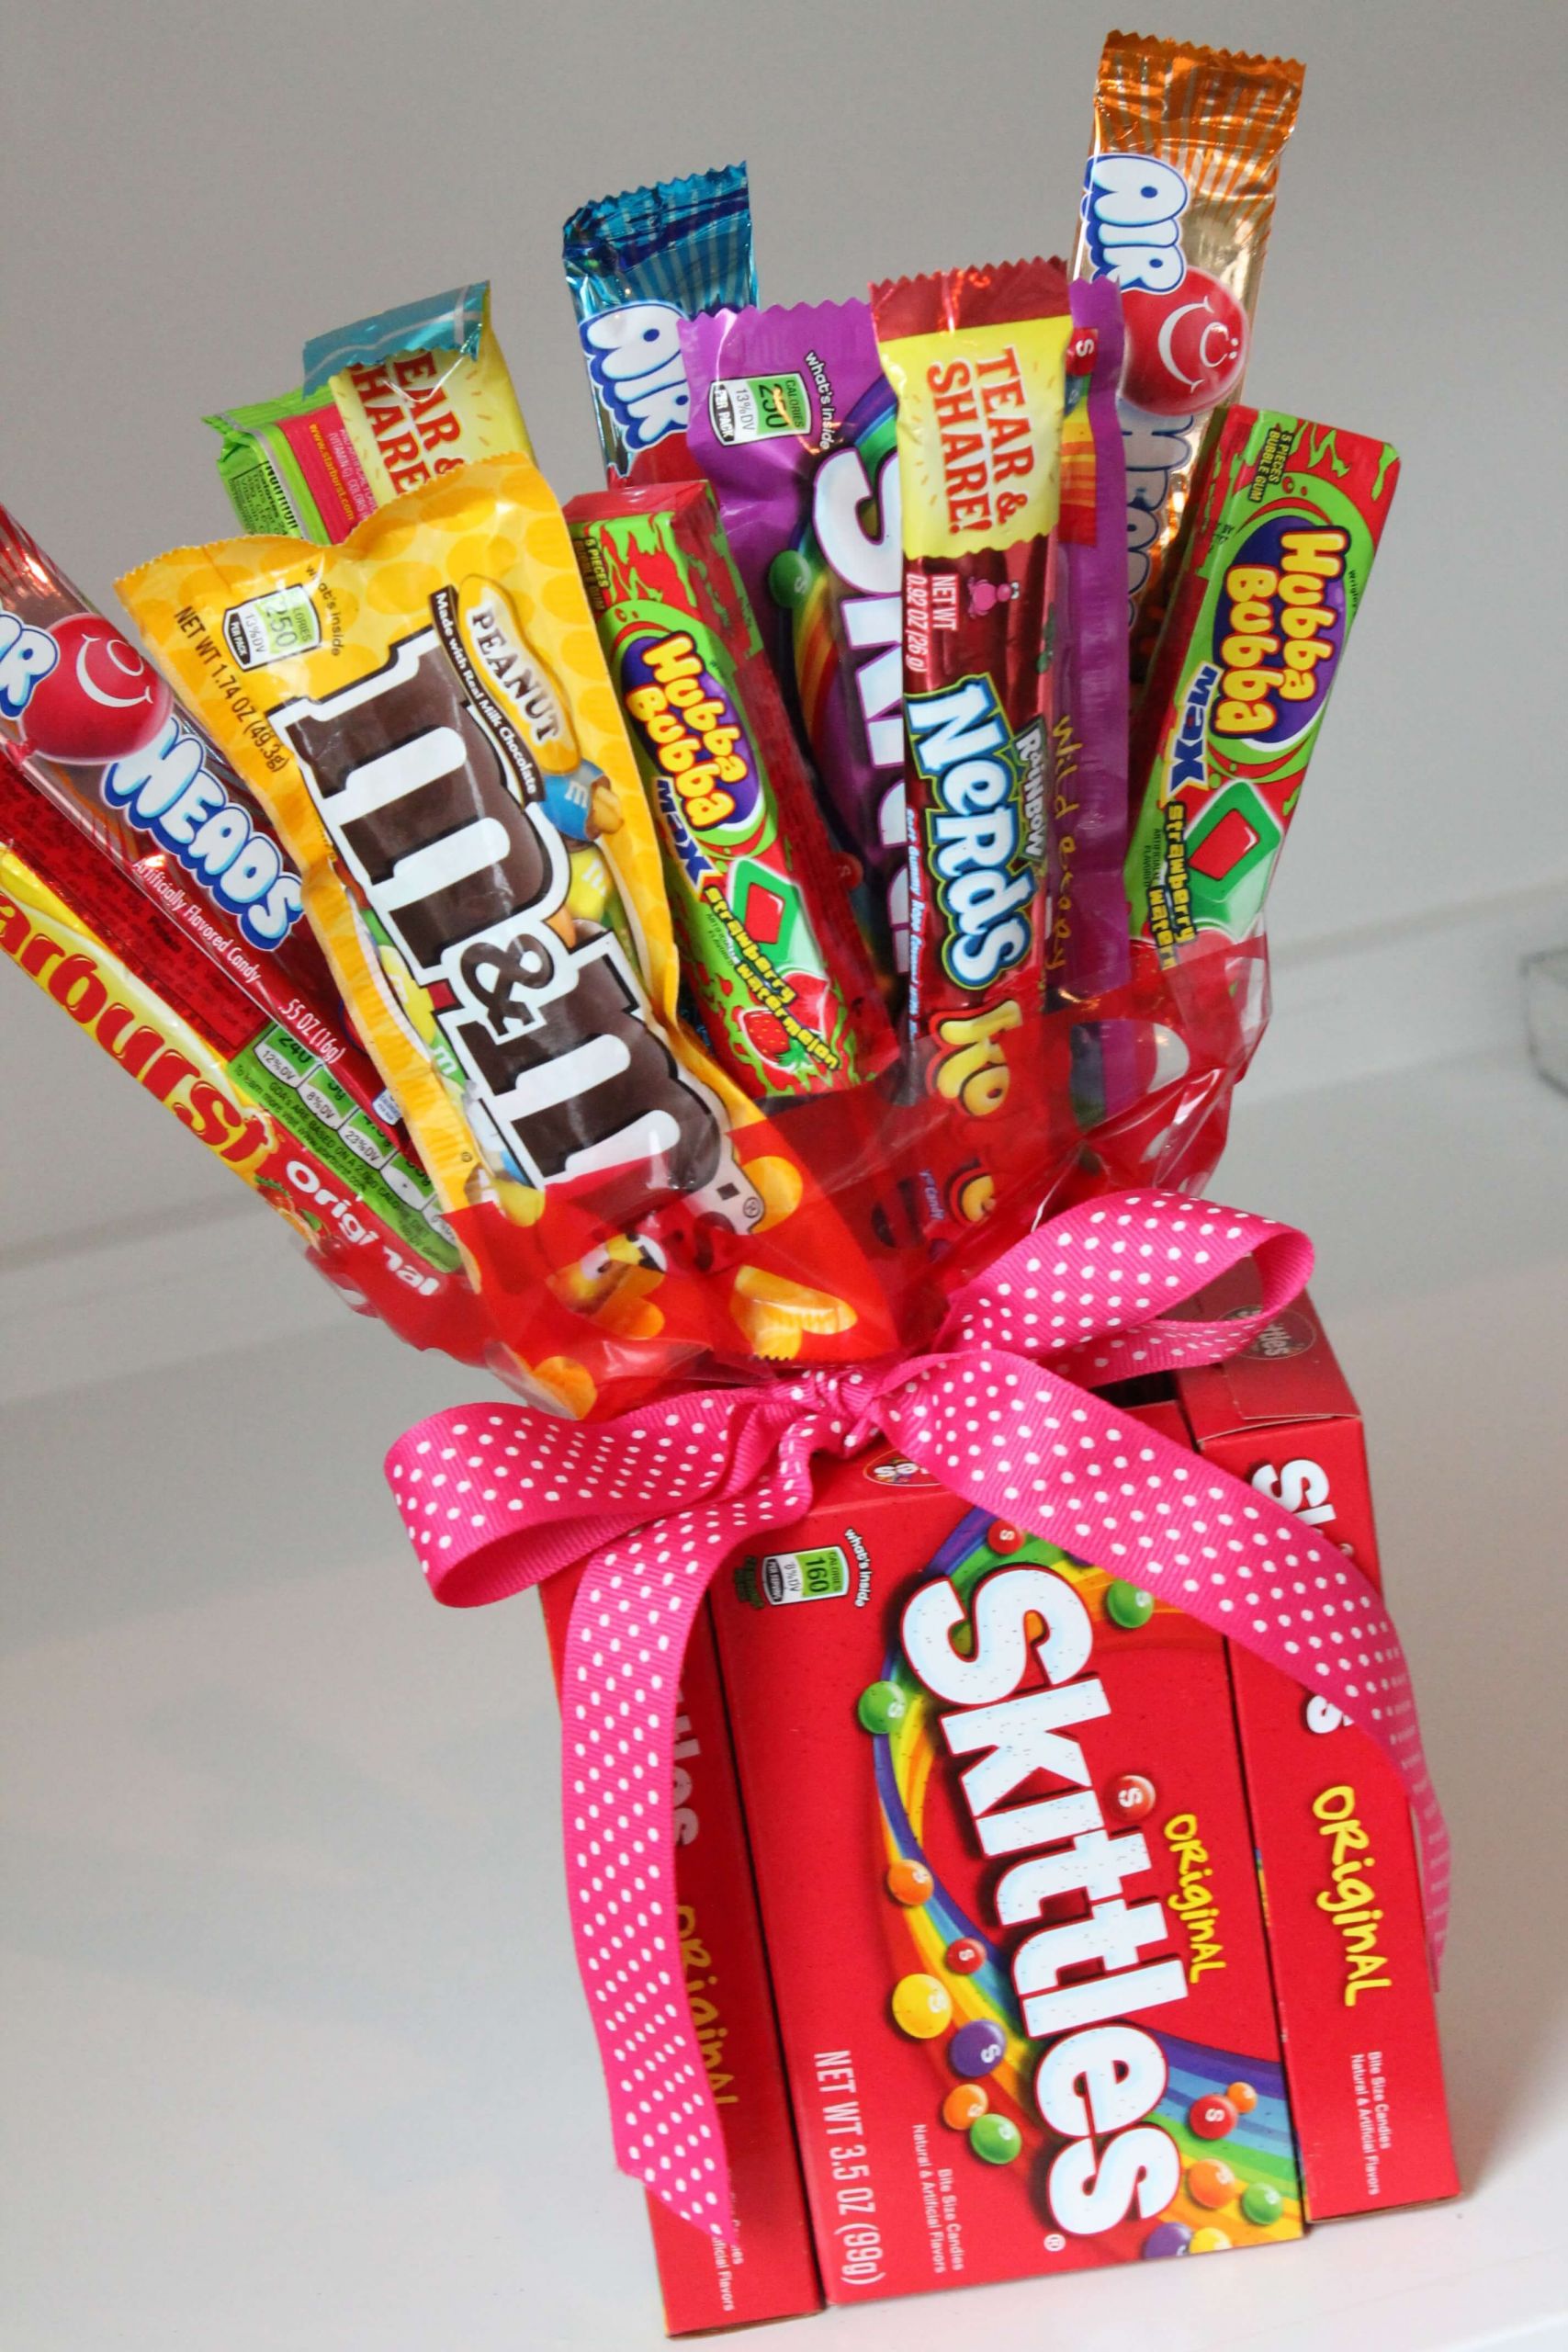 Valentines Candy Gift Ideas
 DIY Candy Bouquets for Valentines Day Birthdays & More